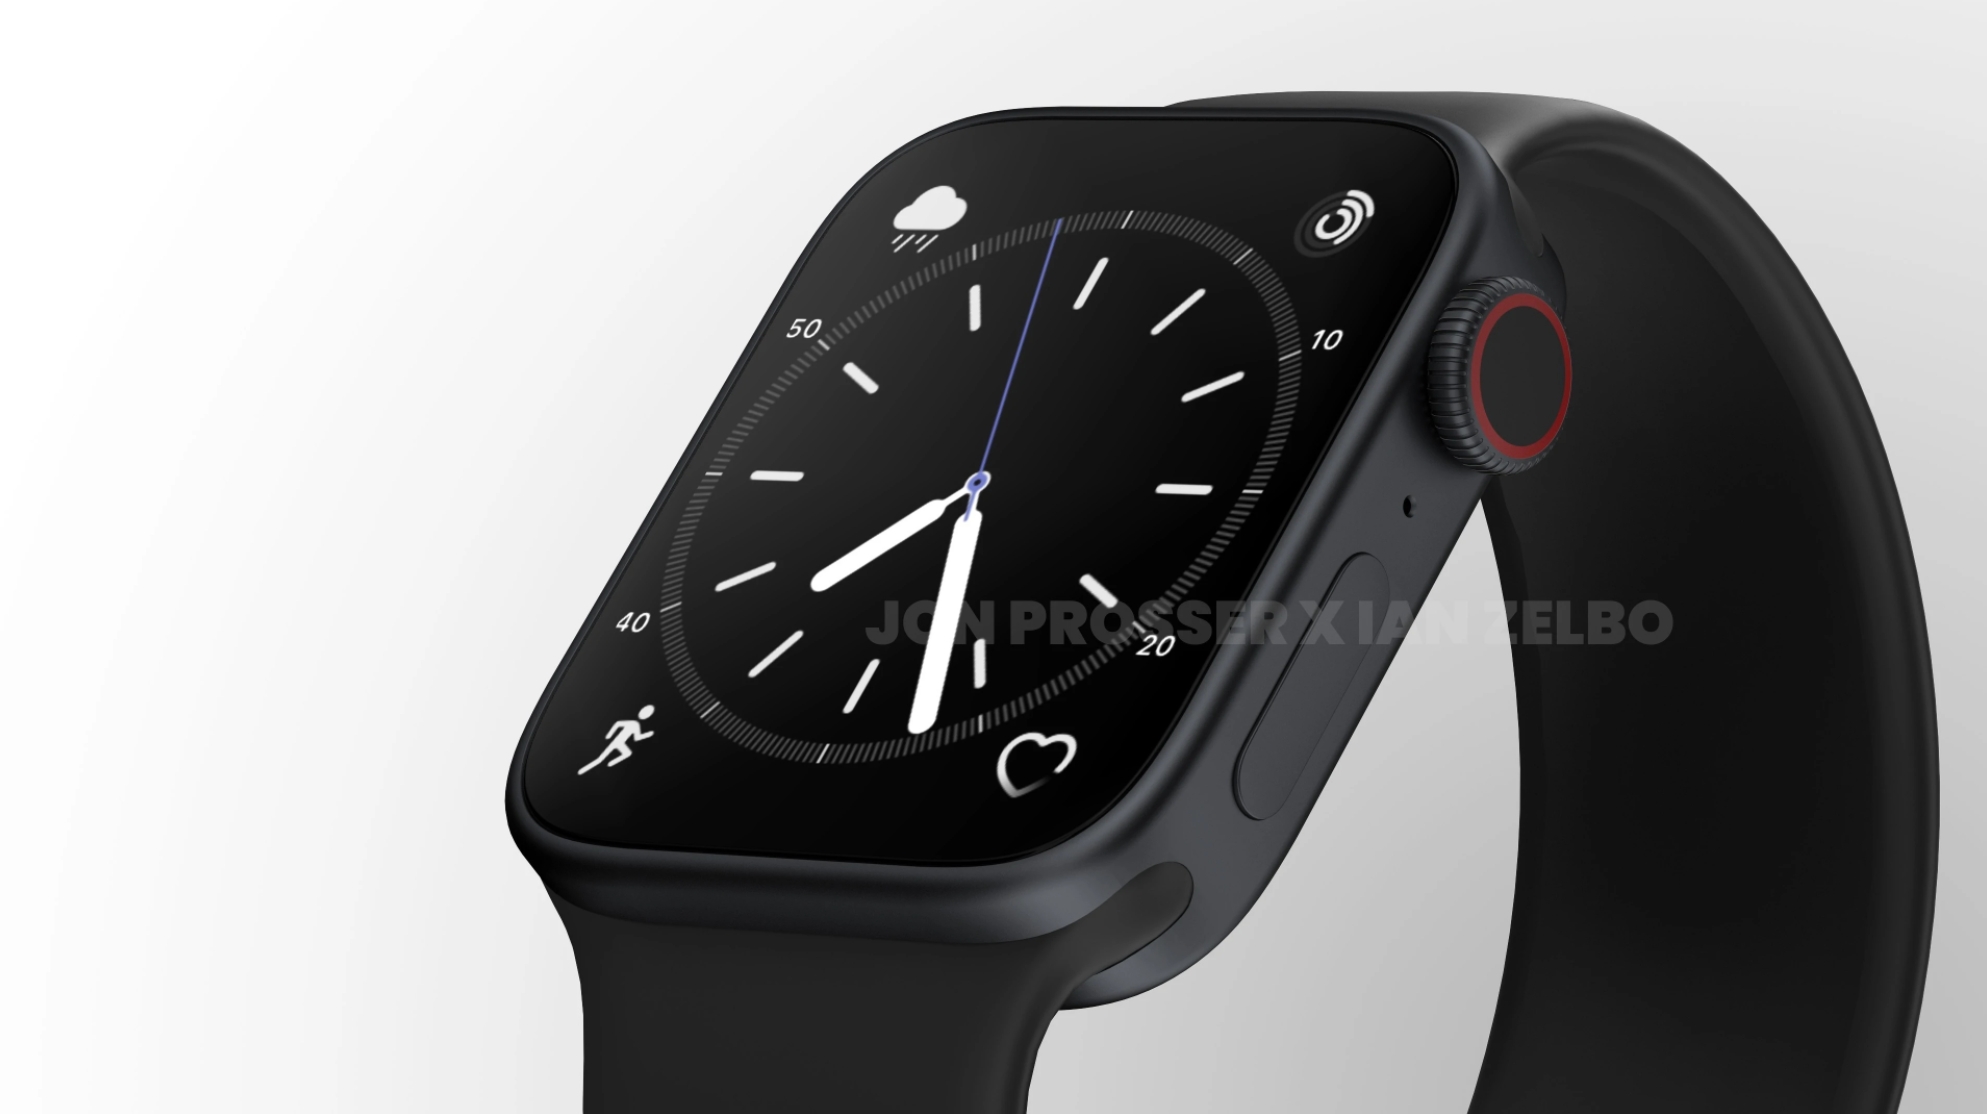 An unofficial render of the Apple Watch 8